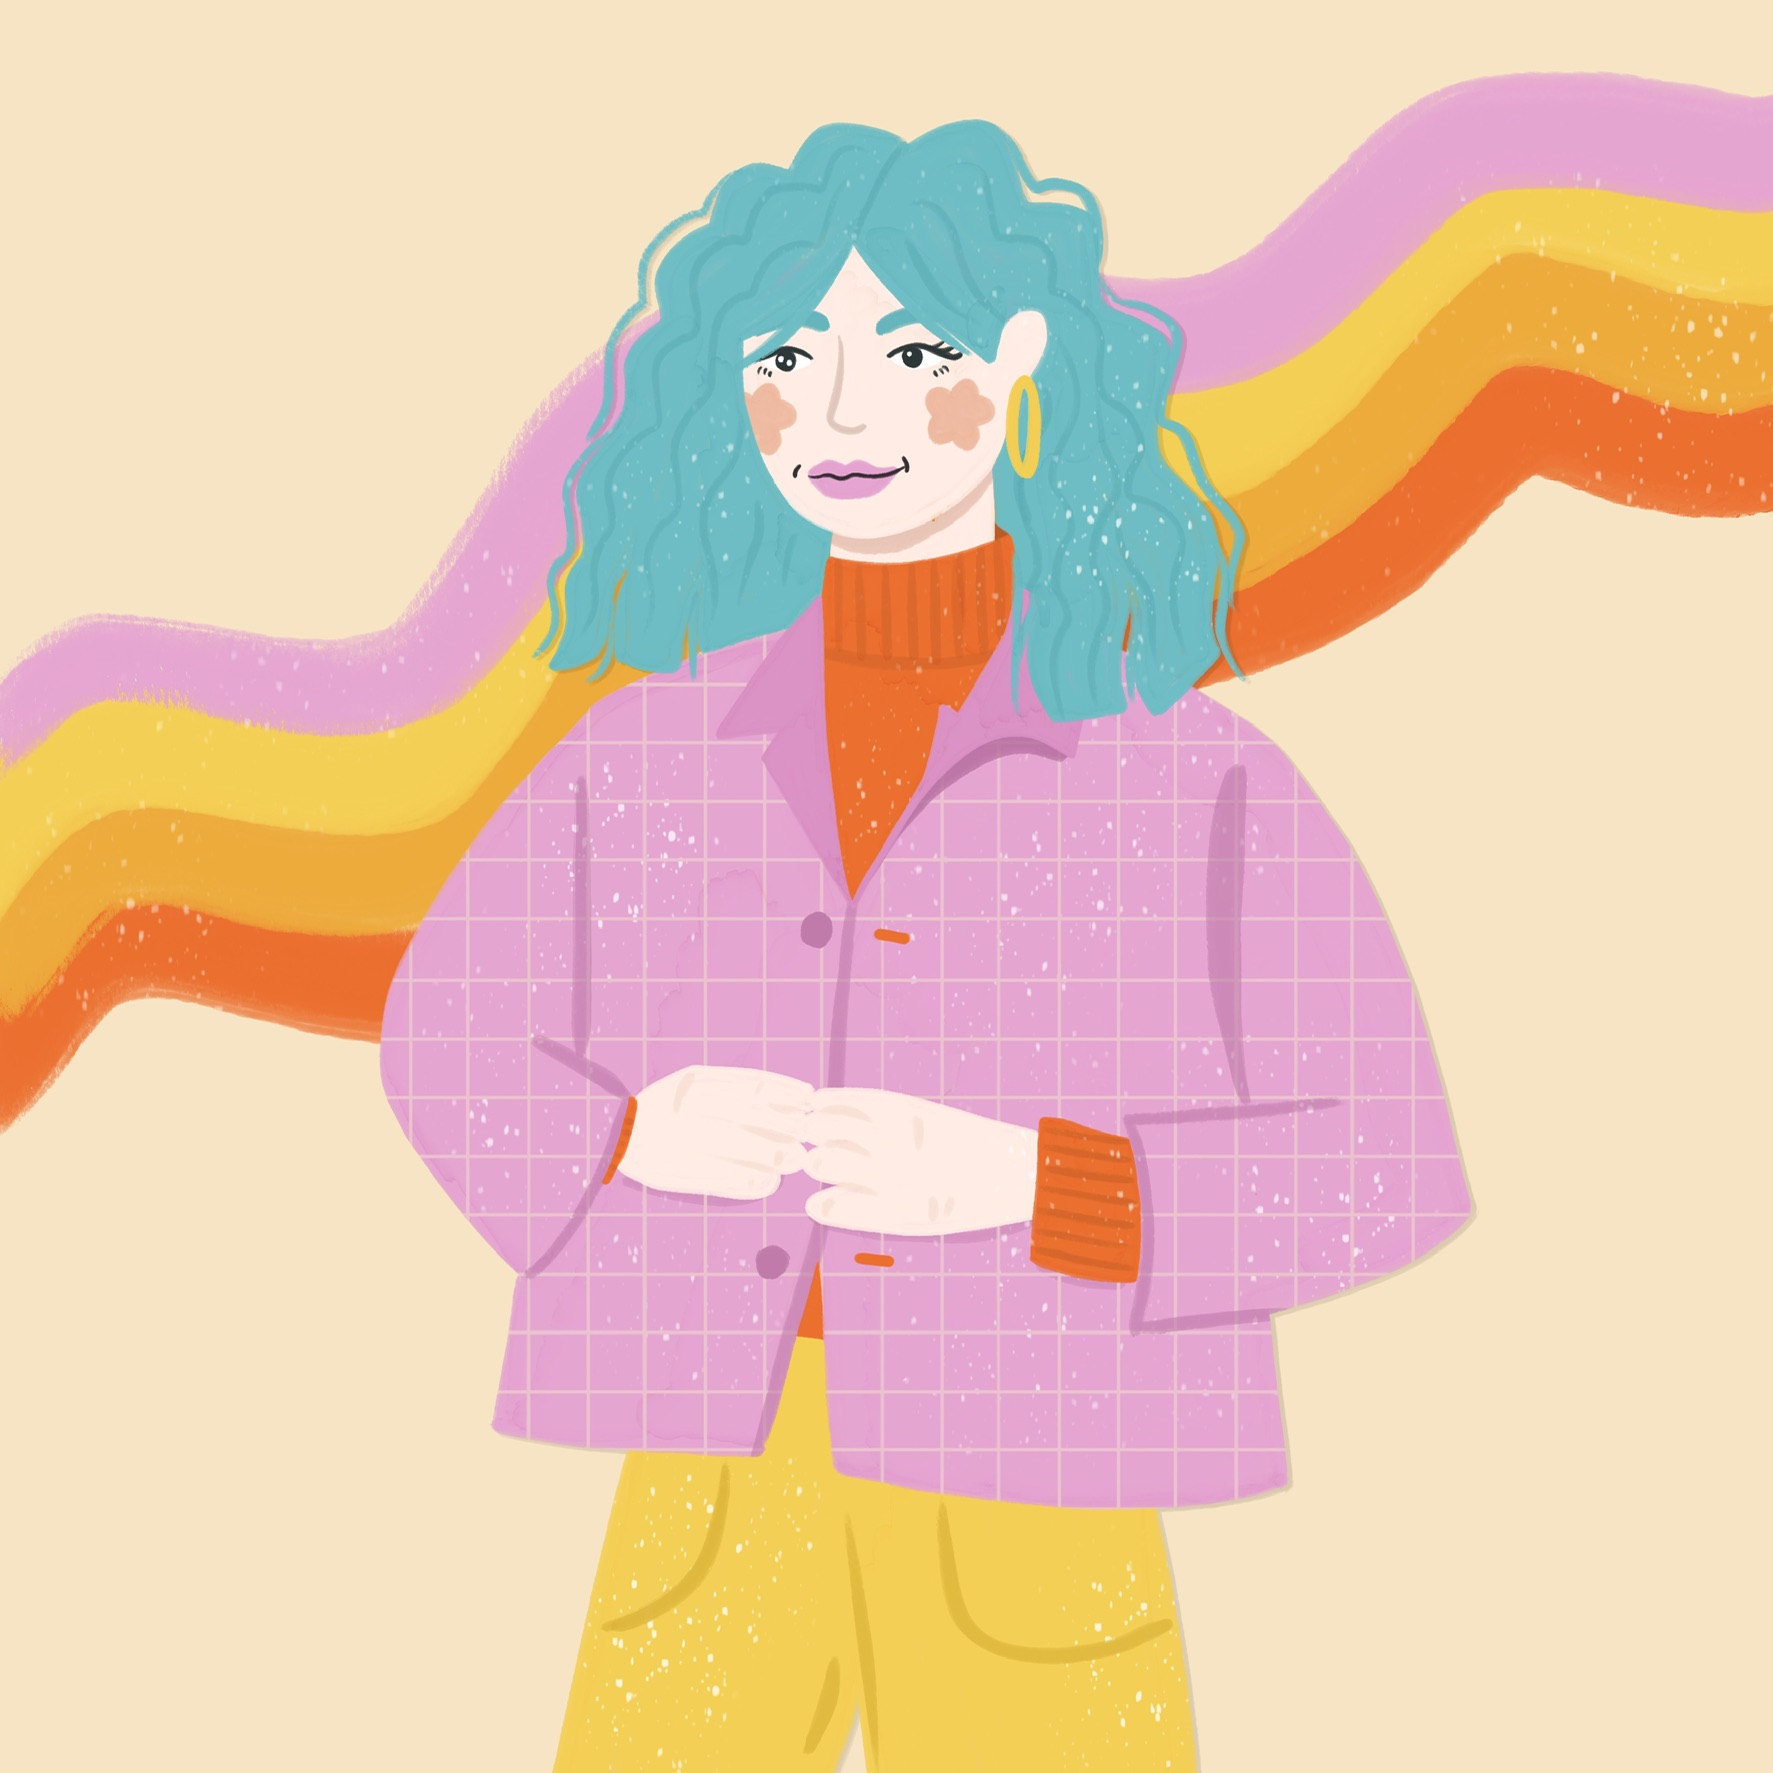 A young woman with blue, wavy hair, red cheeks, pink lips and gold hoop earrings stands upright, looking toward the left-hand side of the image. She is wearing a pink checked jacket over orange polo neck and yellow trousers. In the background, there is a wave of colour spreading diagonally across the image. This is made up of four conjoined brush strokes: dark orange, light orange, yellow and pink. The main background behind this is beige.